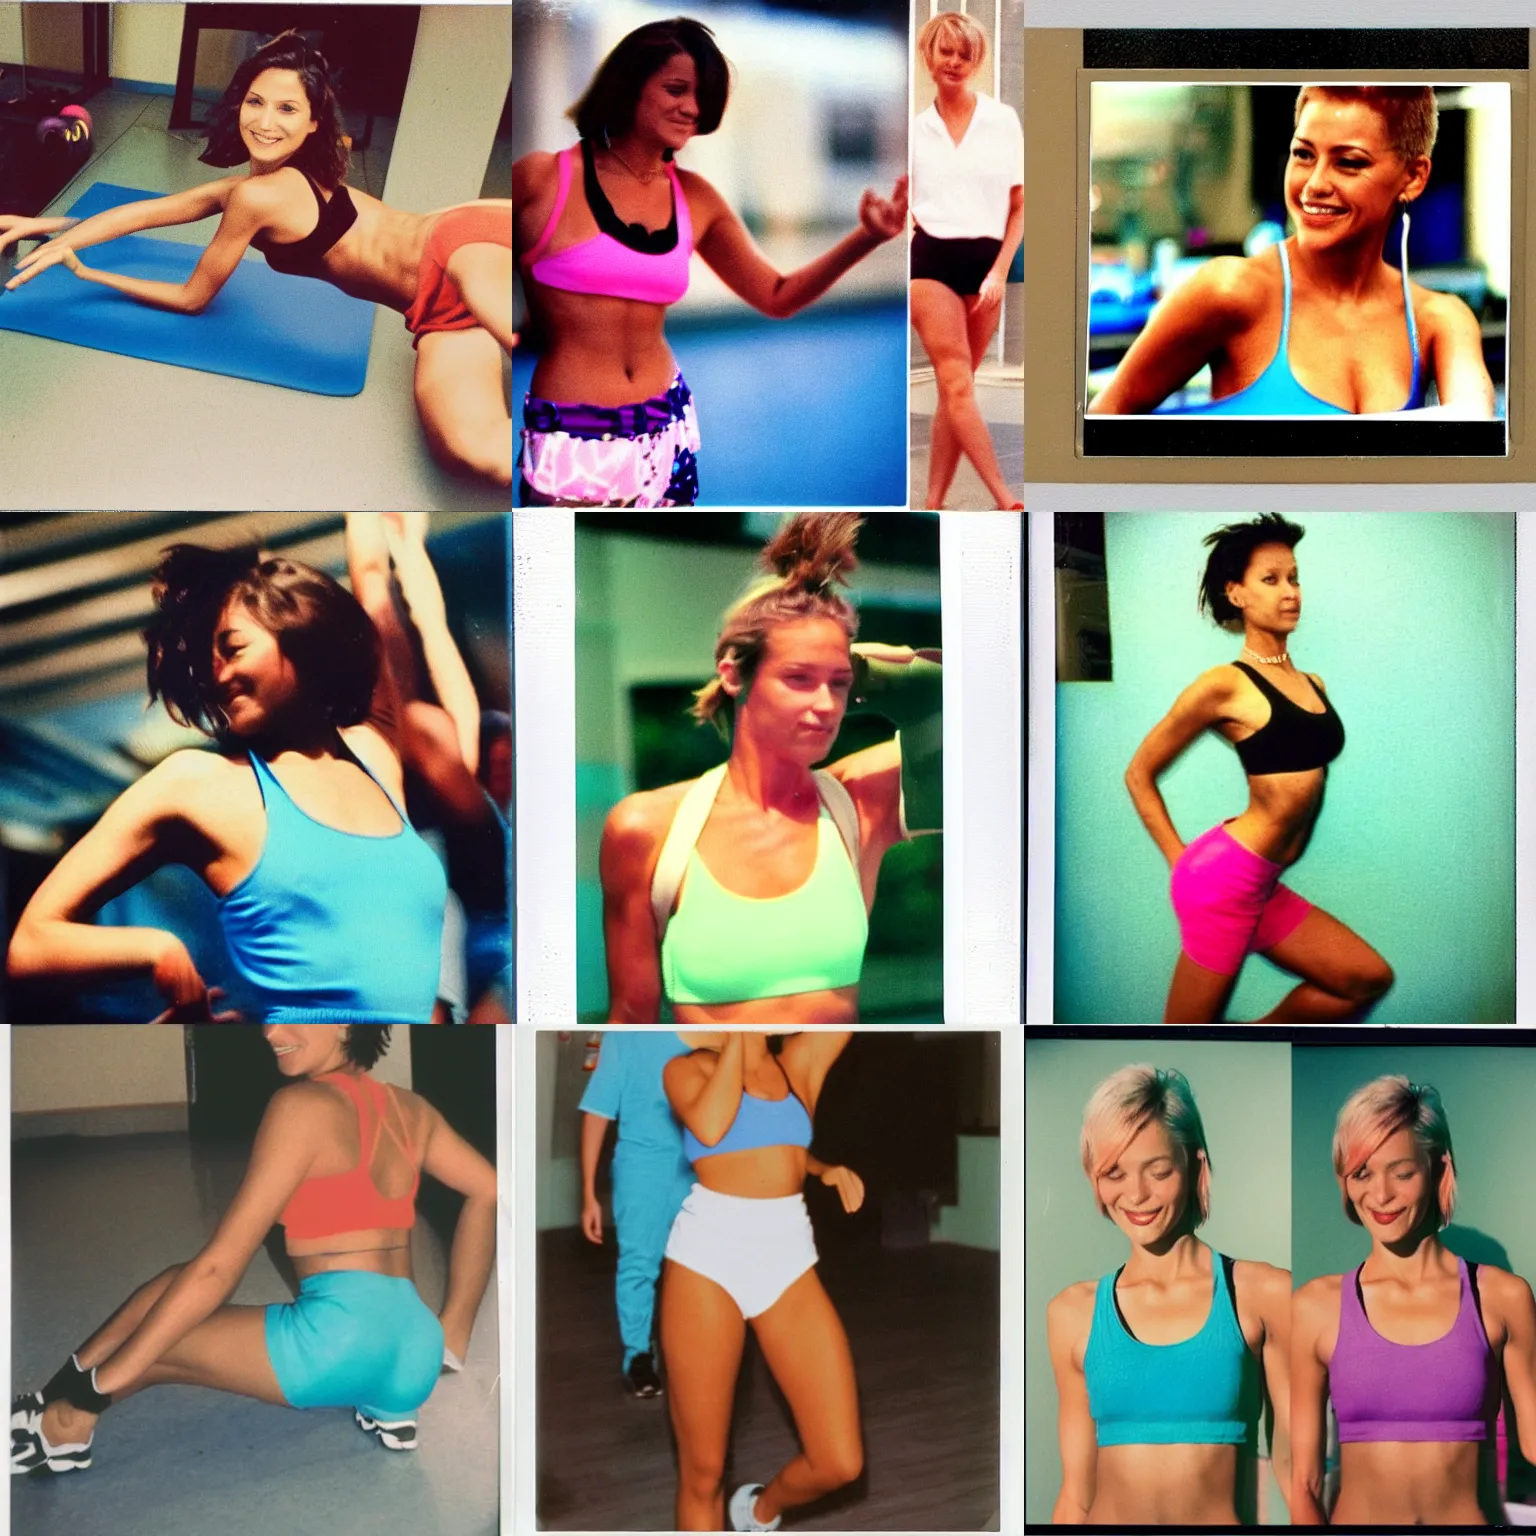 Prompt: 90's color Polaroid, A Beautiful Woman doing aerobics at the gym, short hair, tanned skin.